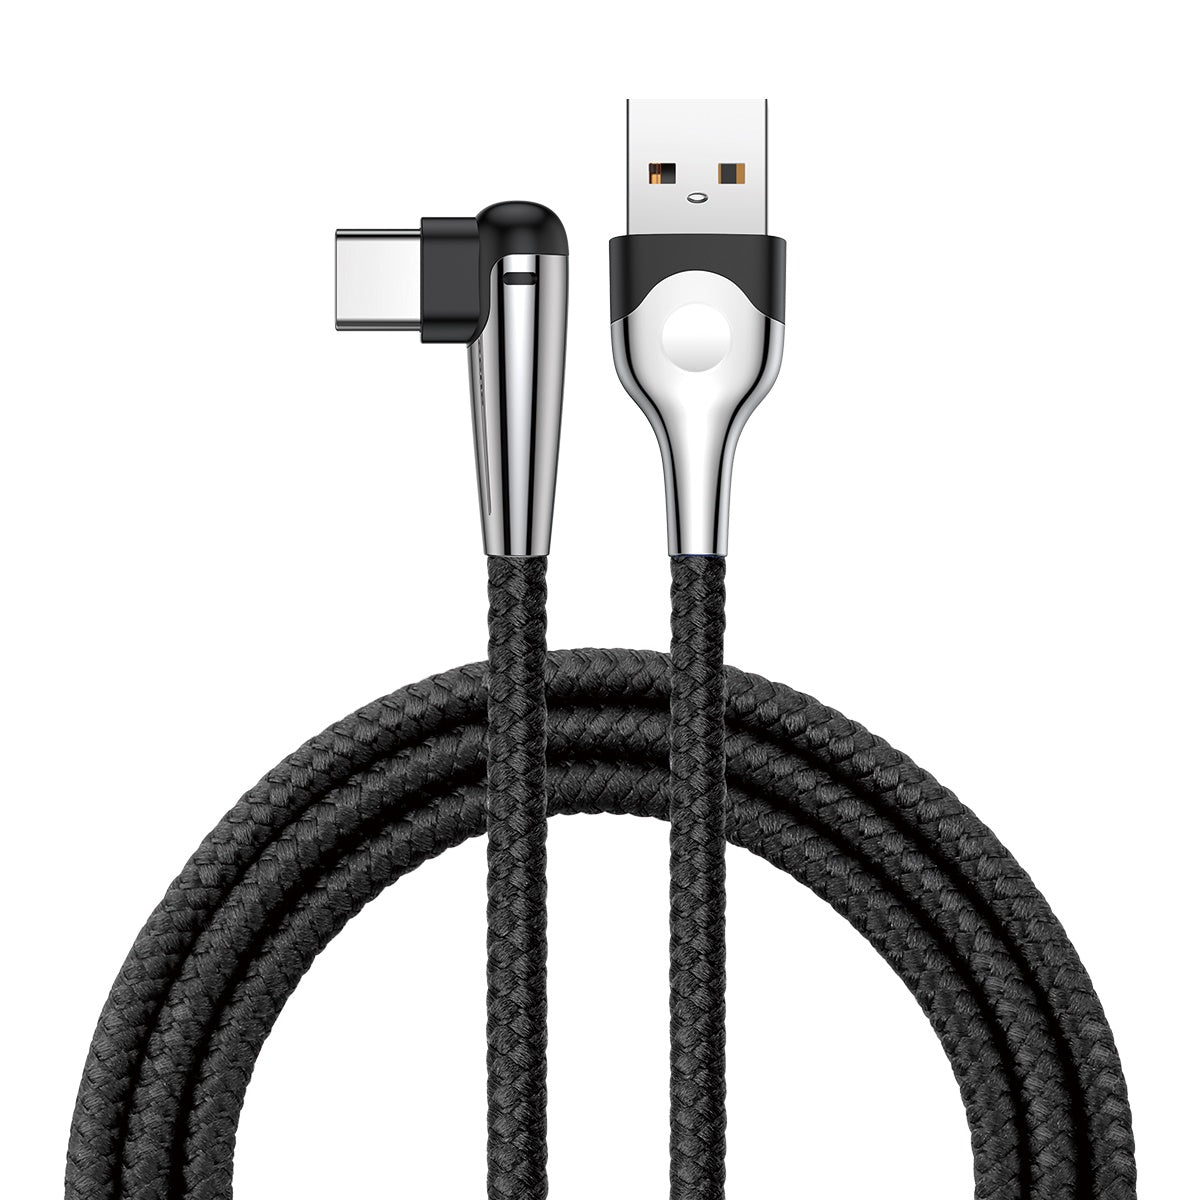 70-4CATMVP-E01 Type C Cable 2 meters, Right Angle, Date Sync and Charging, Black